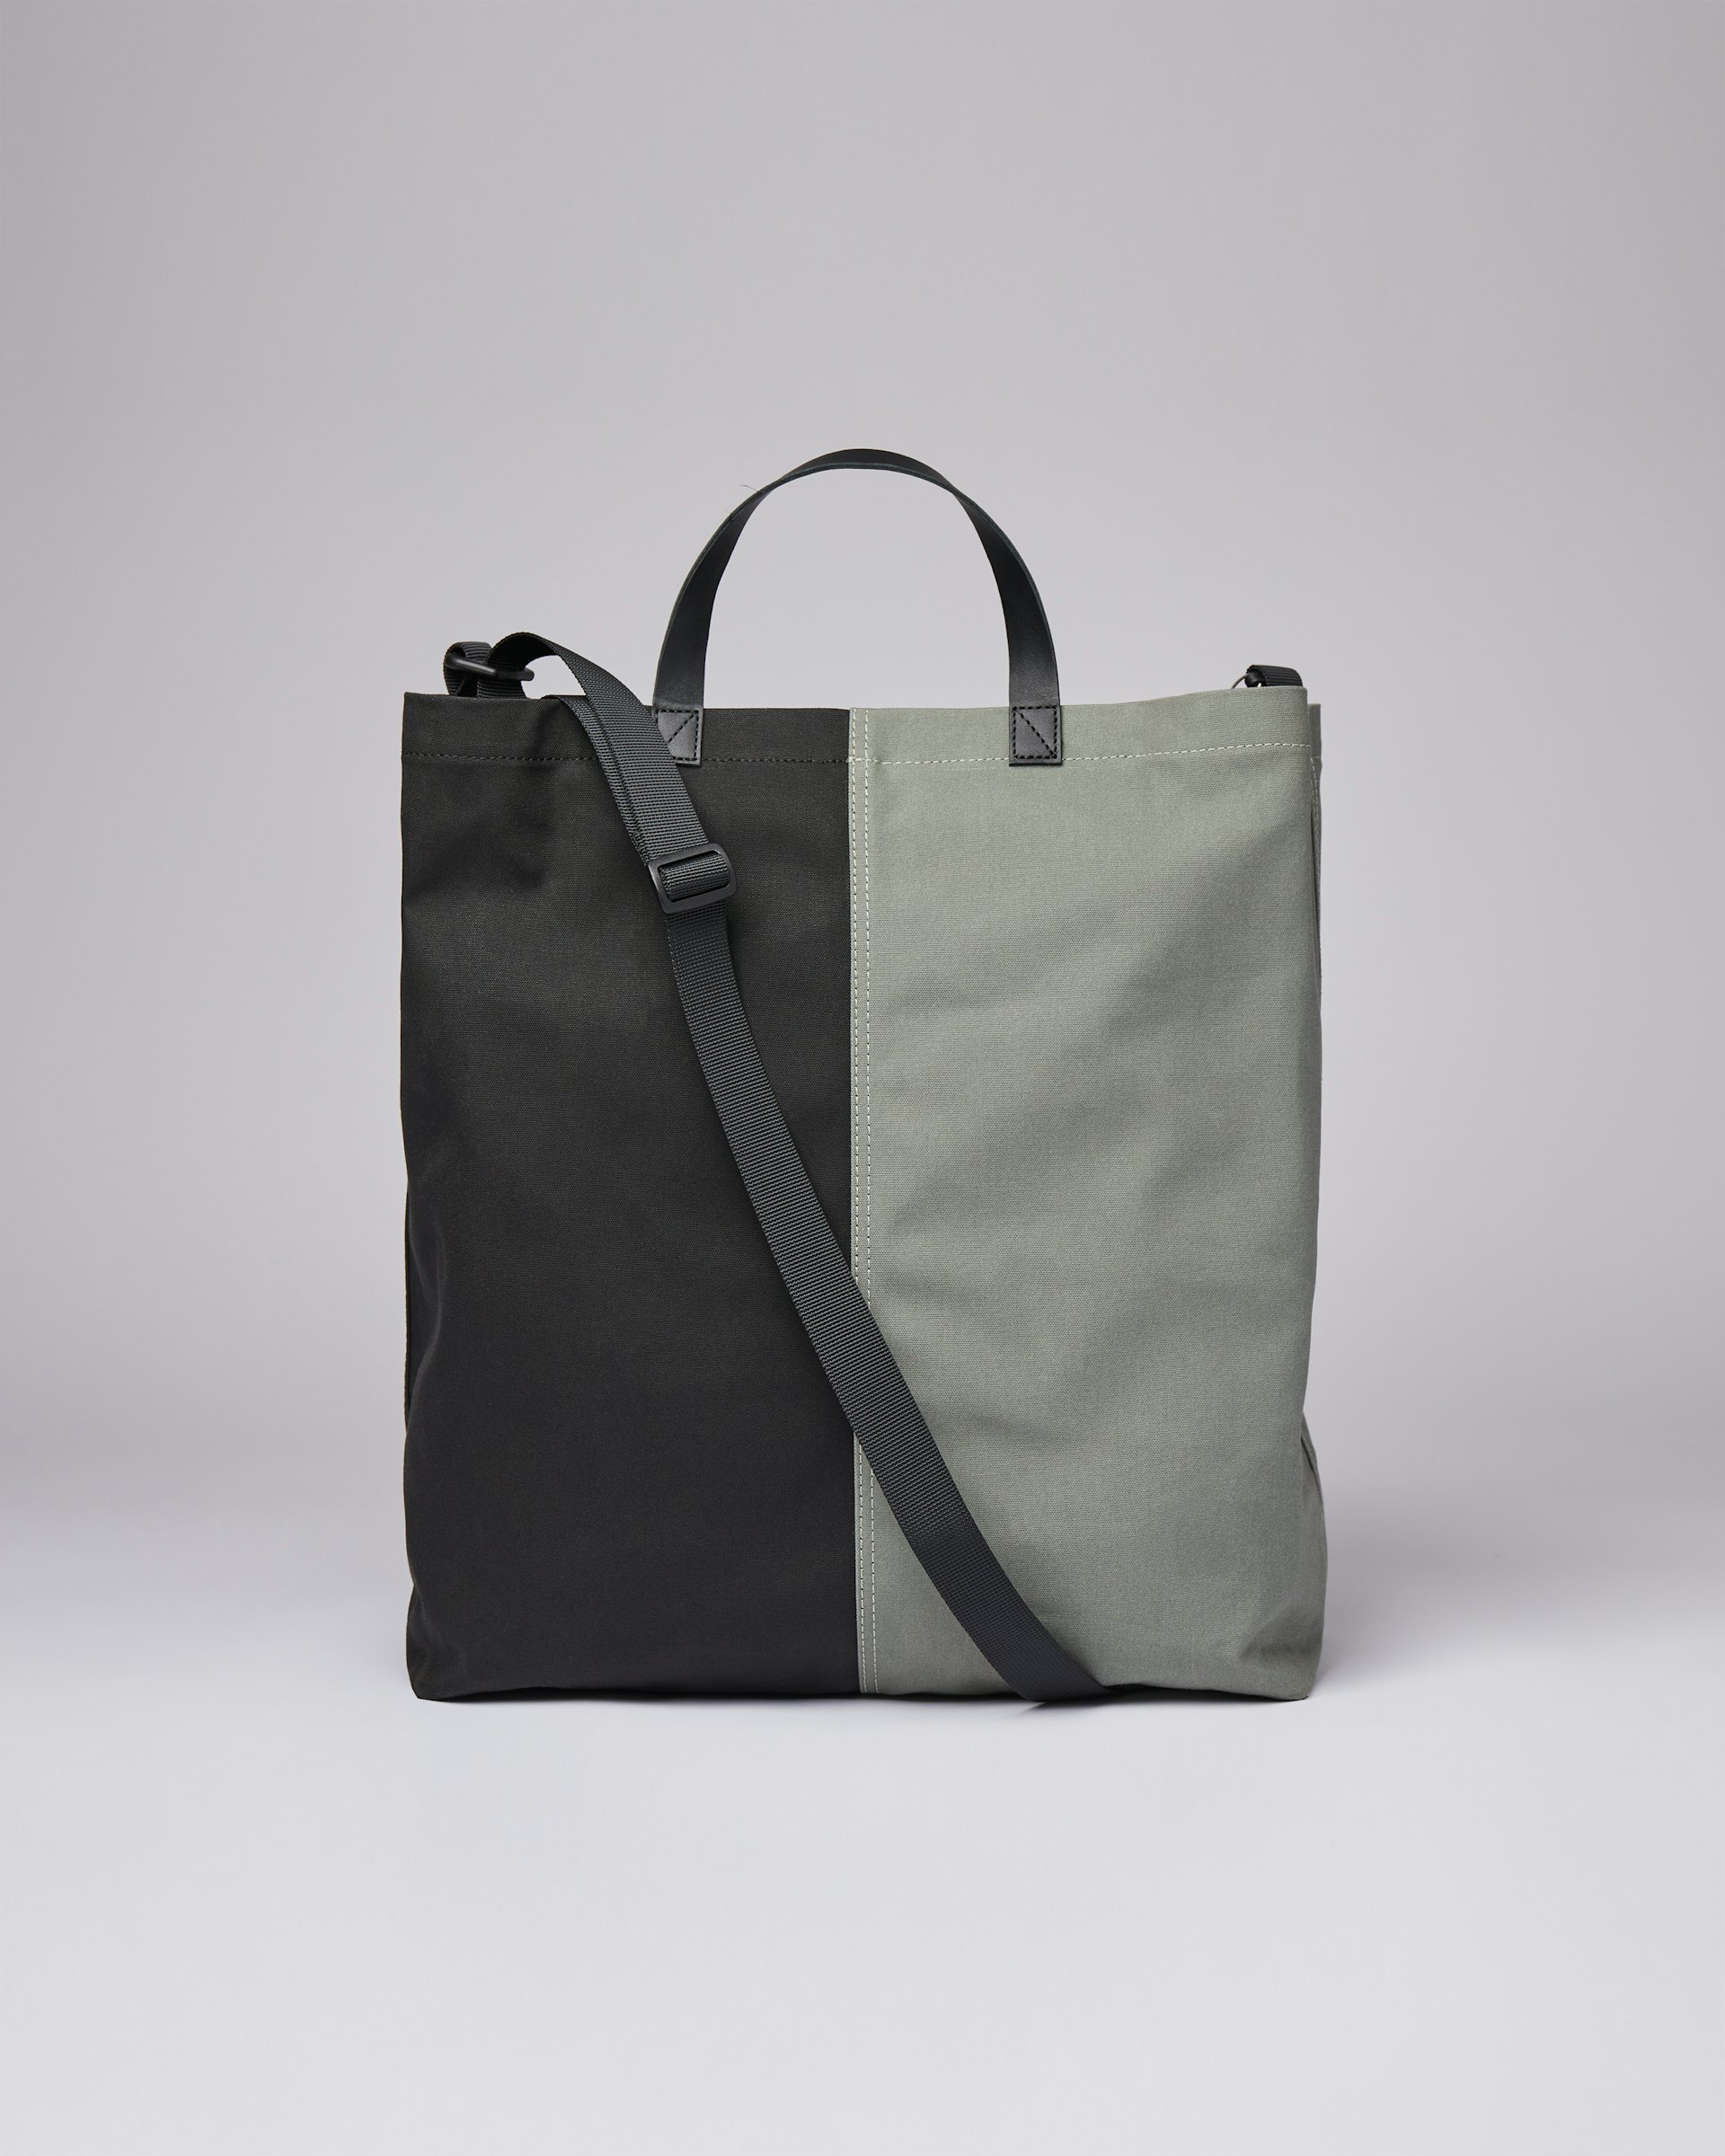 Frankie belongs to the category Tote bags and is in color black & dusty green (3 of 7)